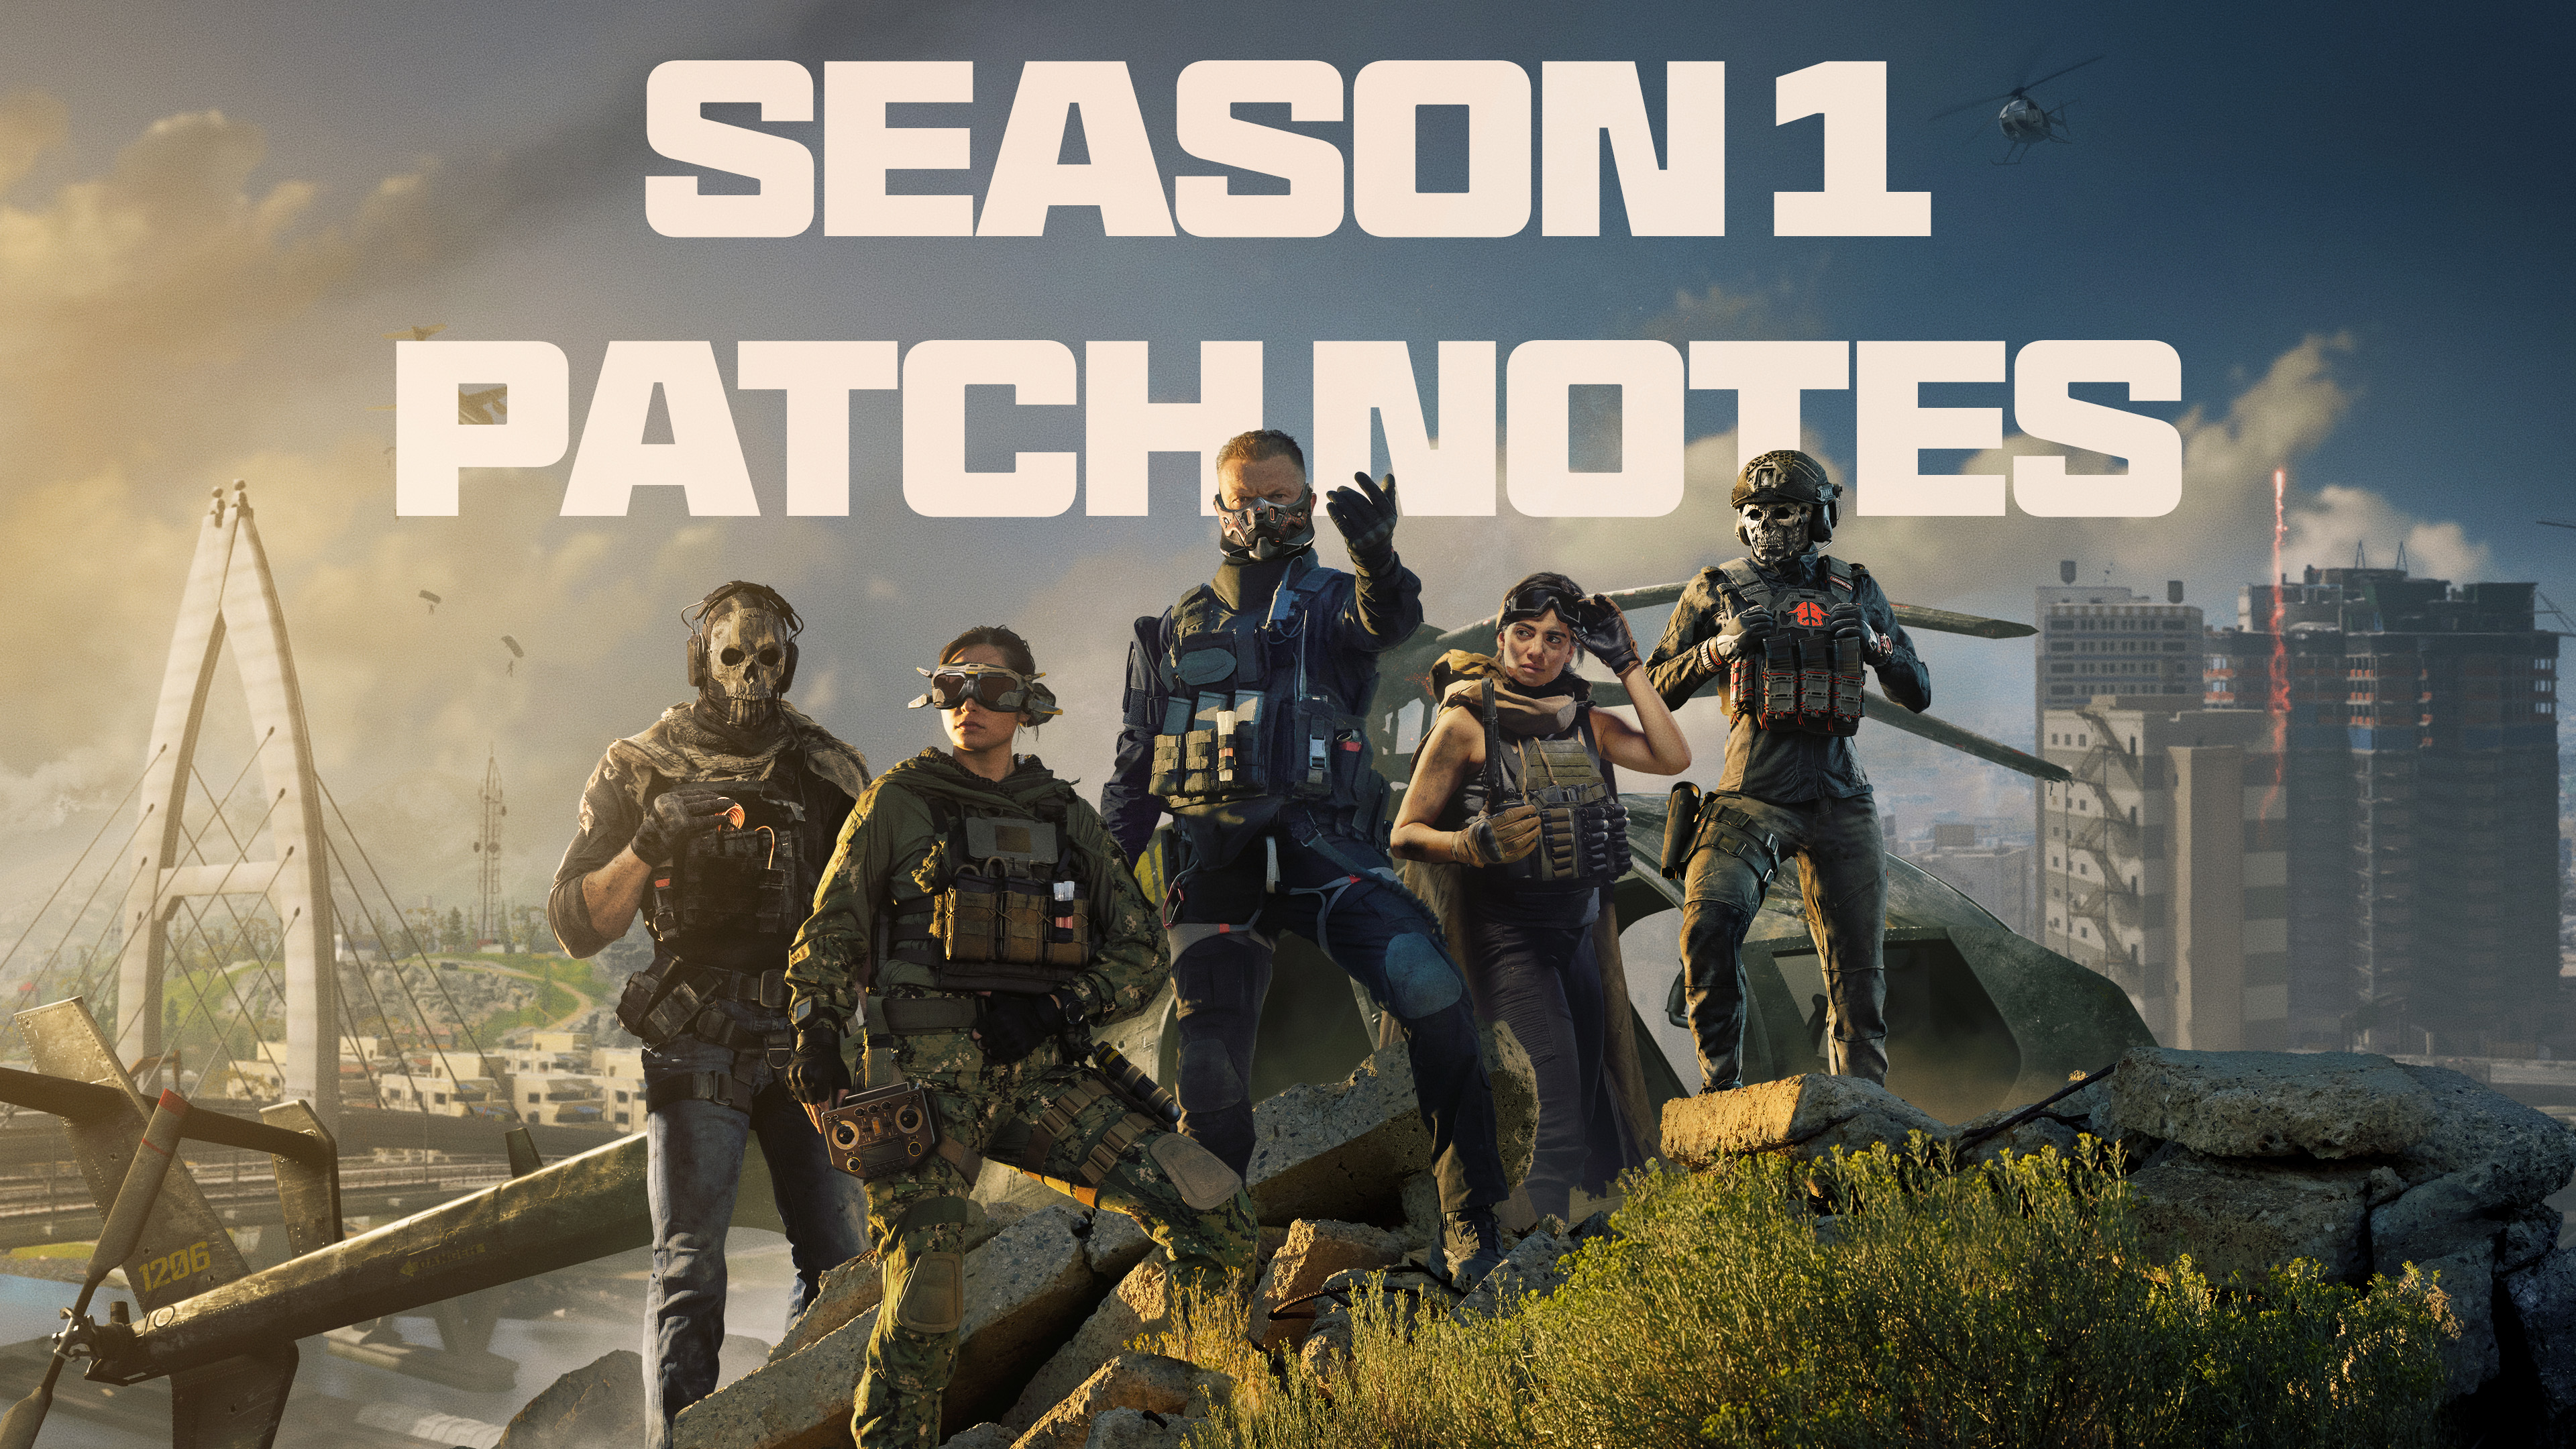 DMZ Season 6 patch notes: The Haunting, new guns, and more - Dot Esports